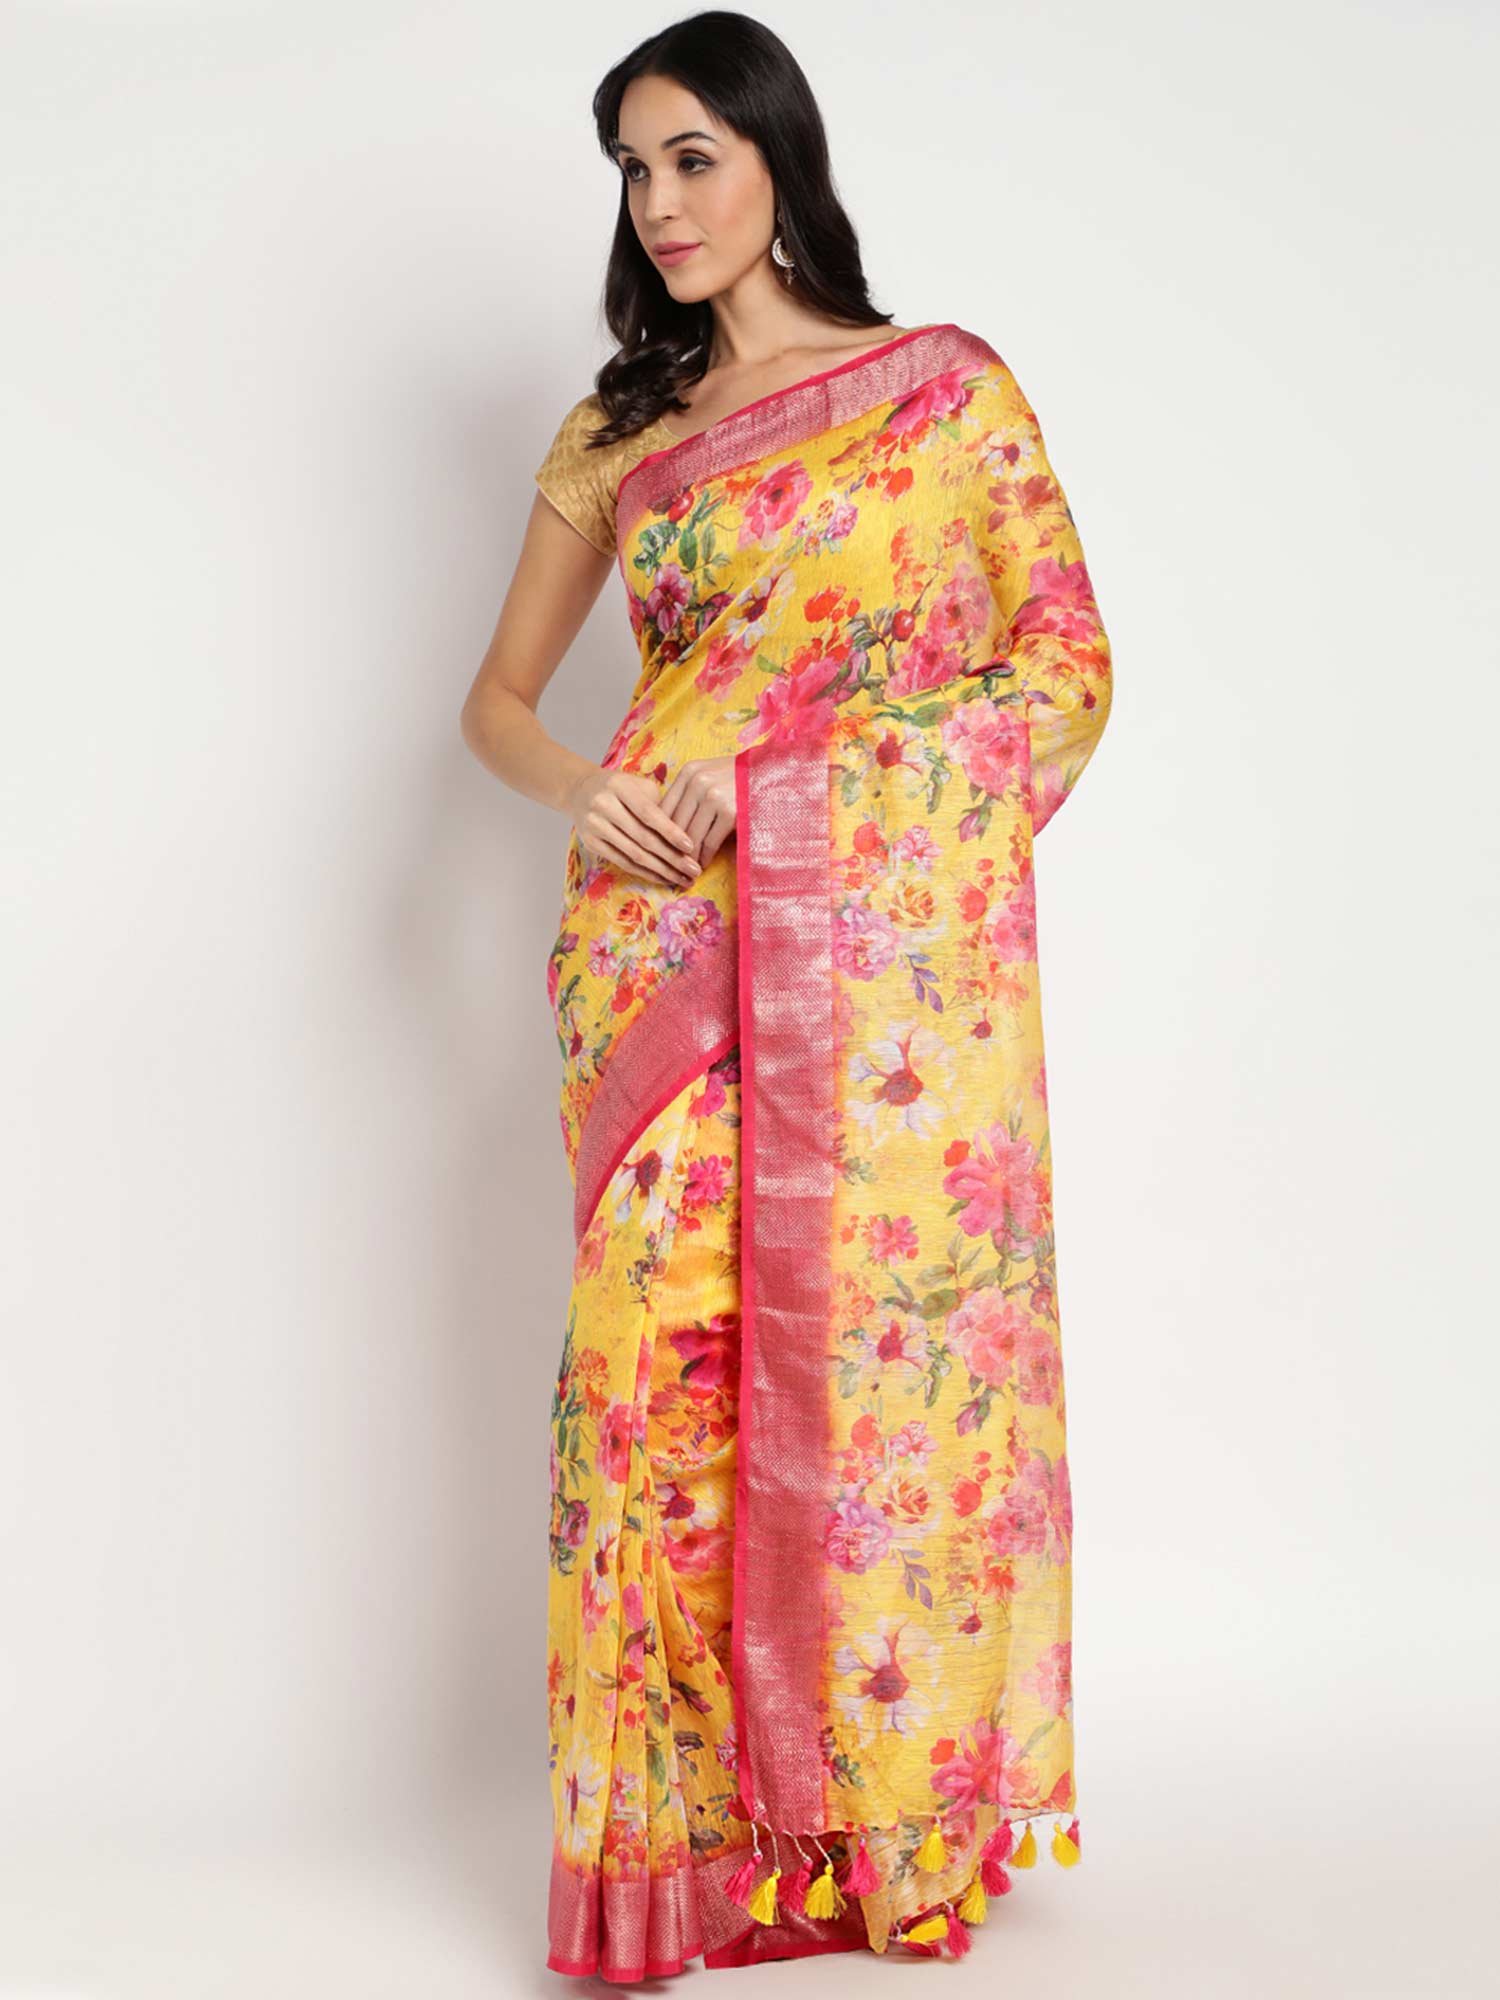 Buy Shayri Women's Floral Digital Print Linen Saree With Unstiched Blouse  Piece (Baby Pink) at Amazon.in